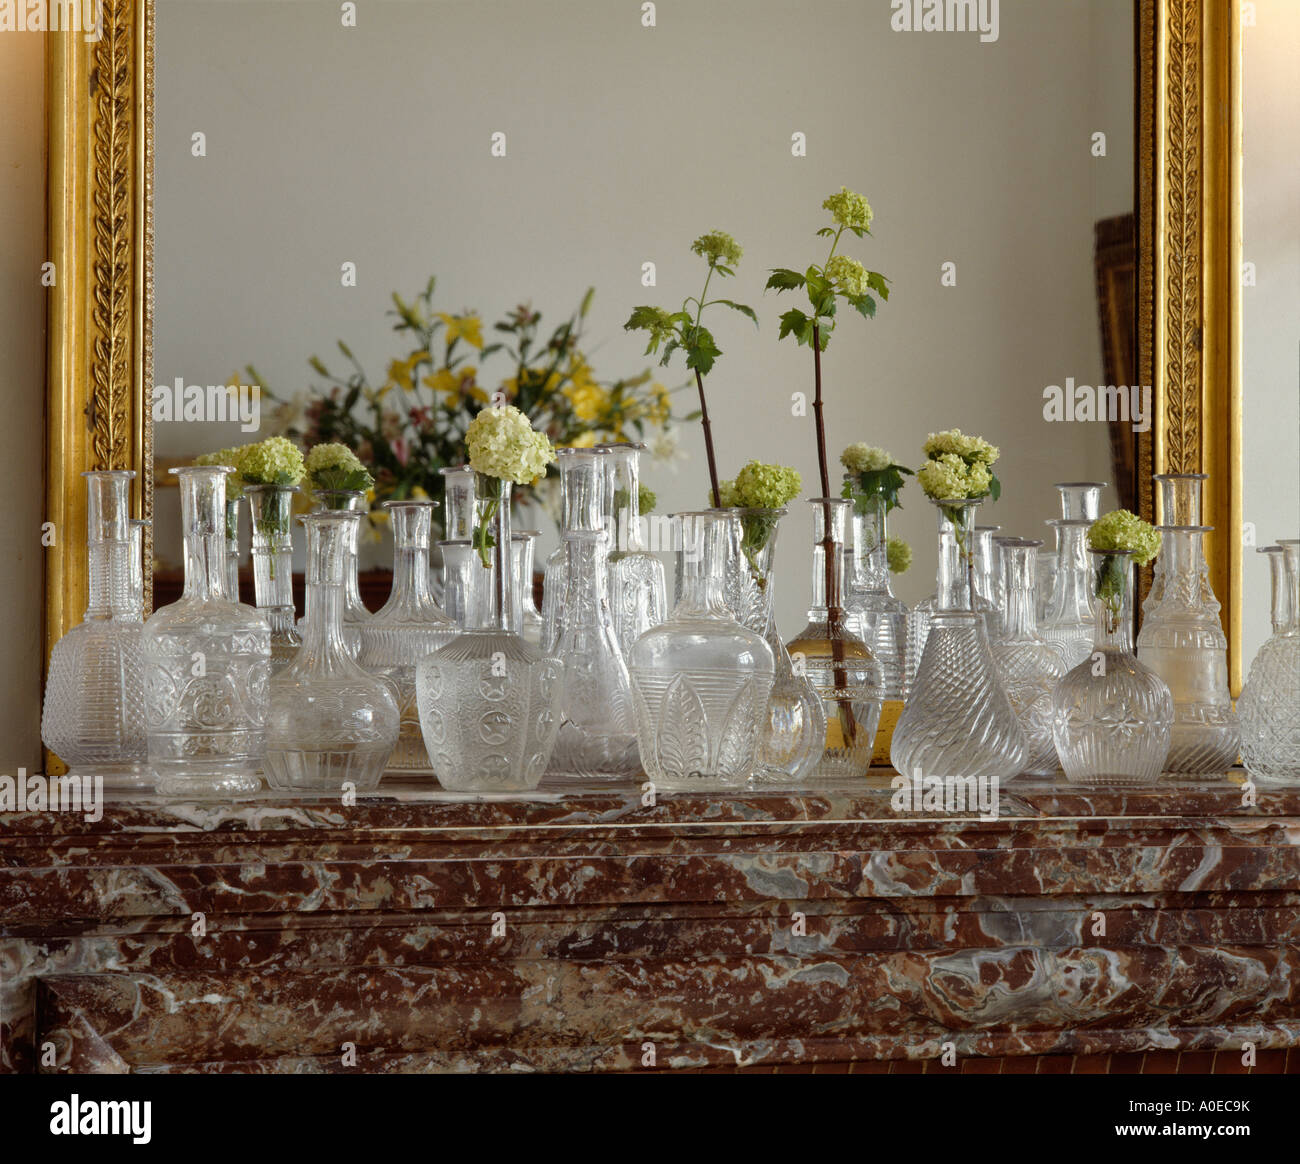 Collection of antique glass decanters in front of mirror on marble mantelpiece Stock Photo